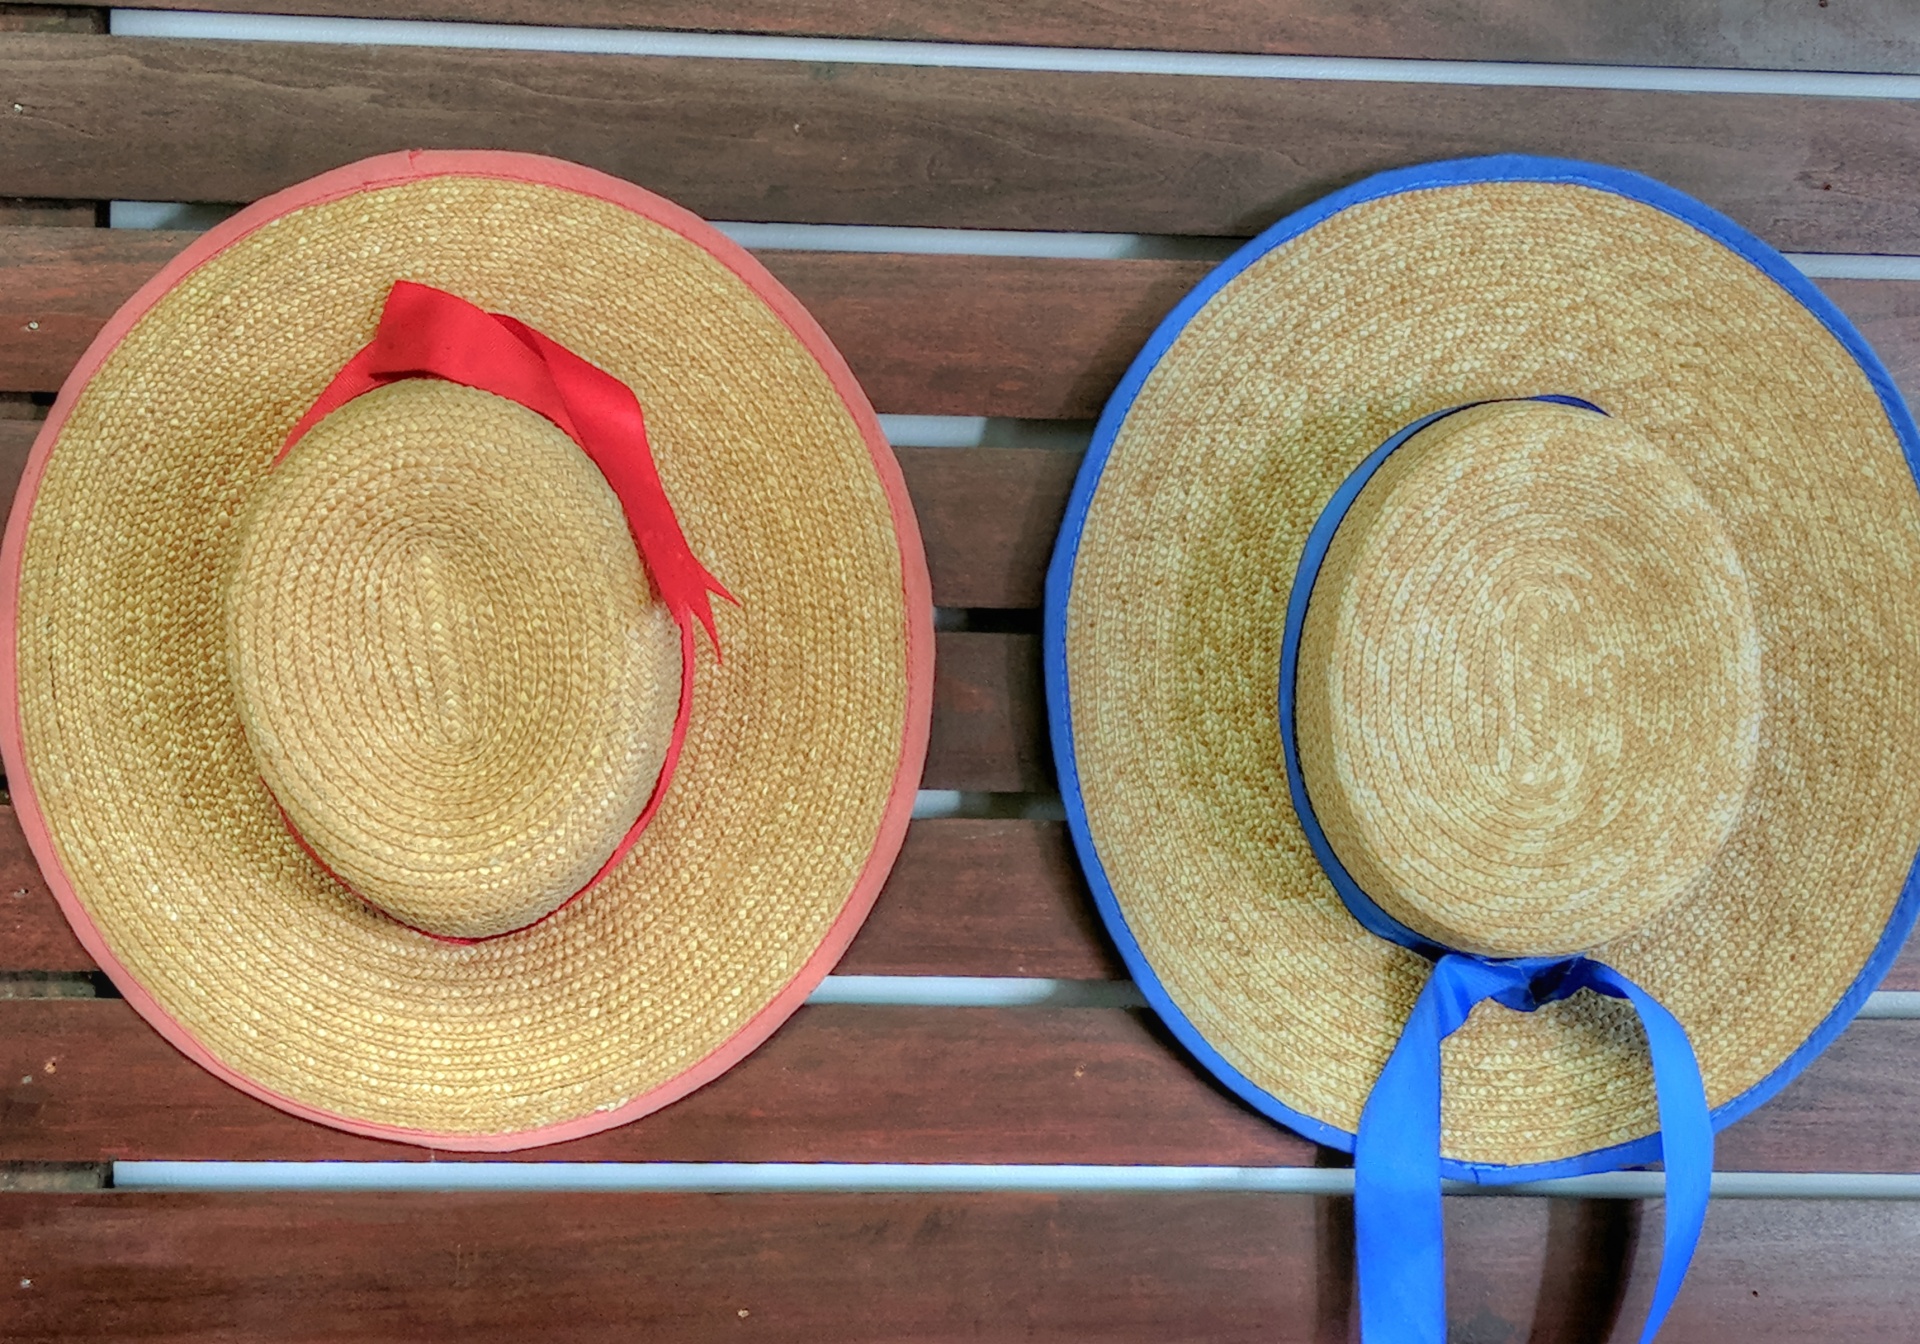 Download Hat Hats Straw Hats Free Photo.